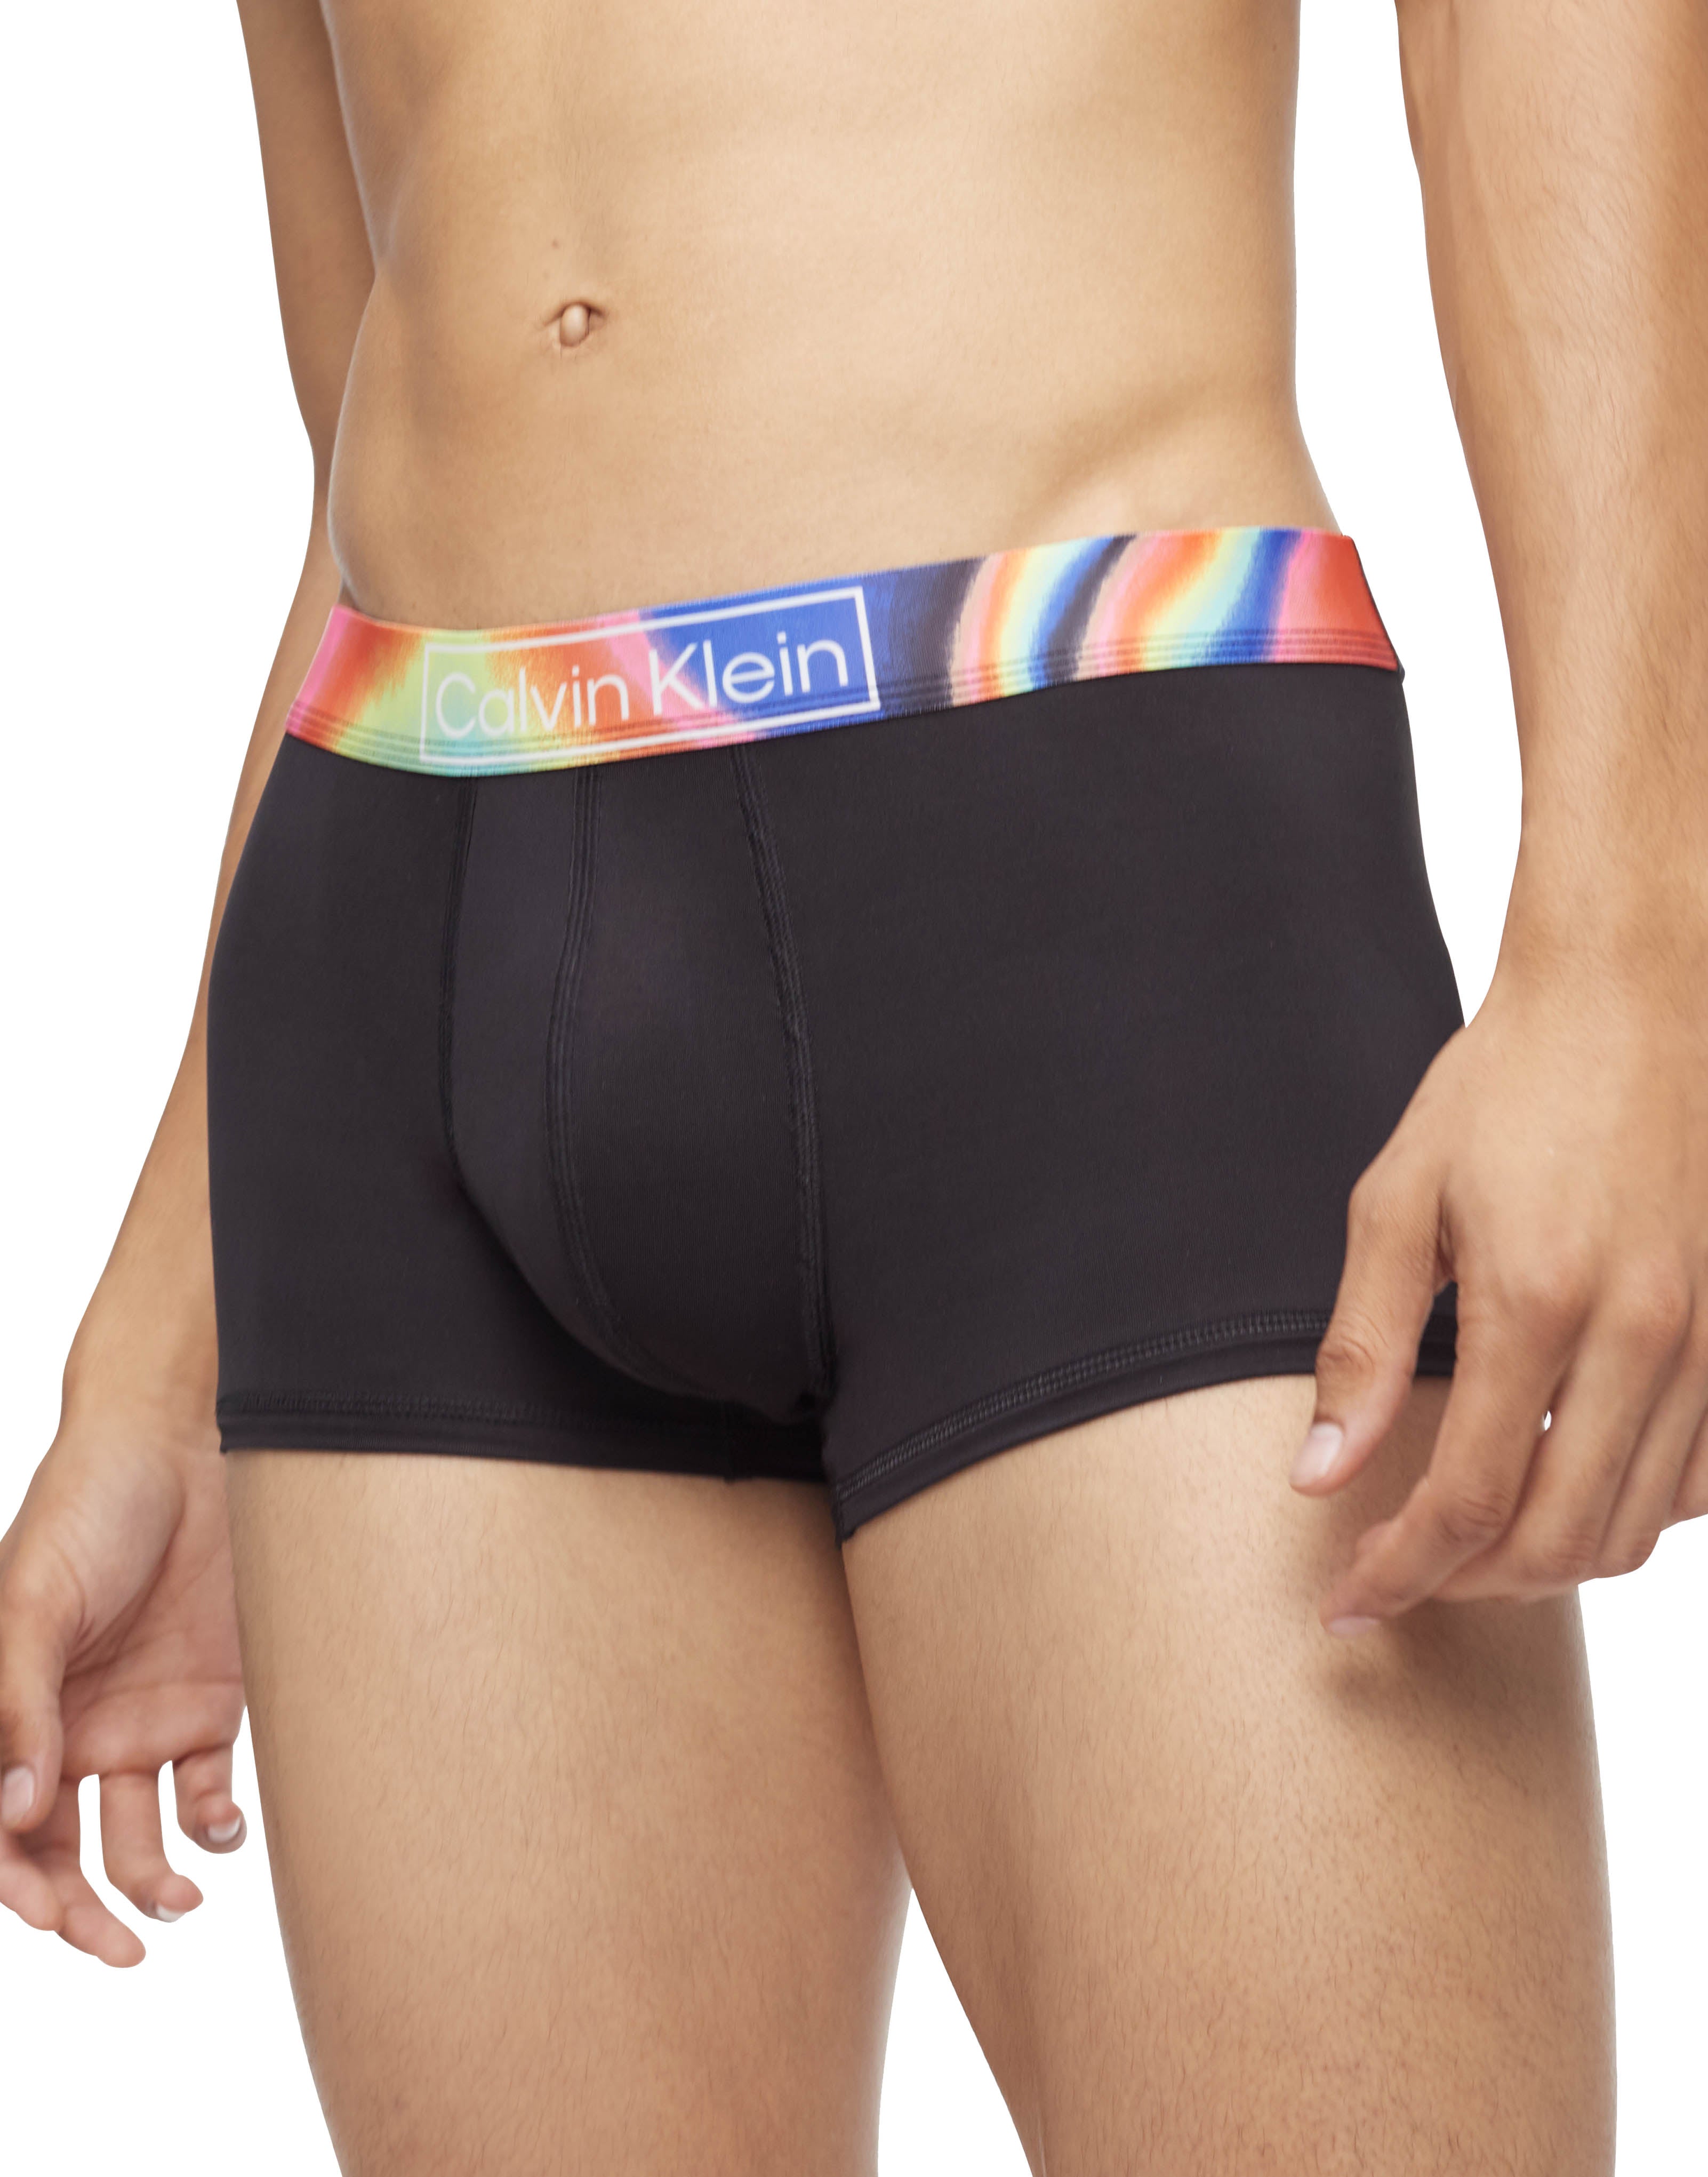 Black Front Calvin Klein Reimagined Heritage Pride Micro Low Rise Trunk NB3156